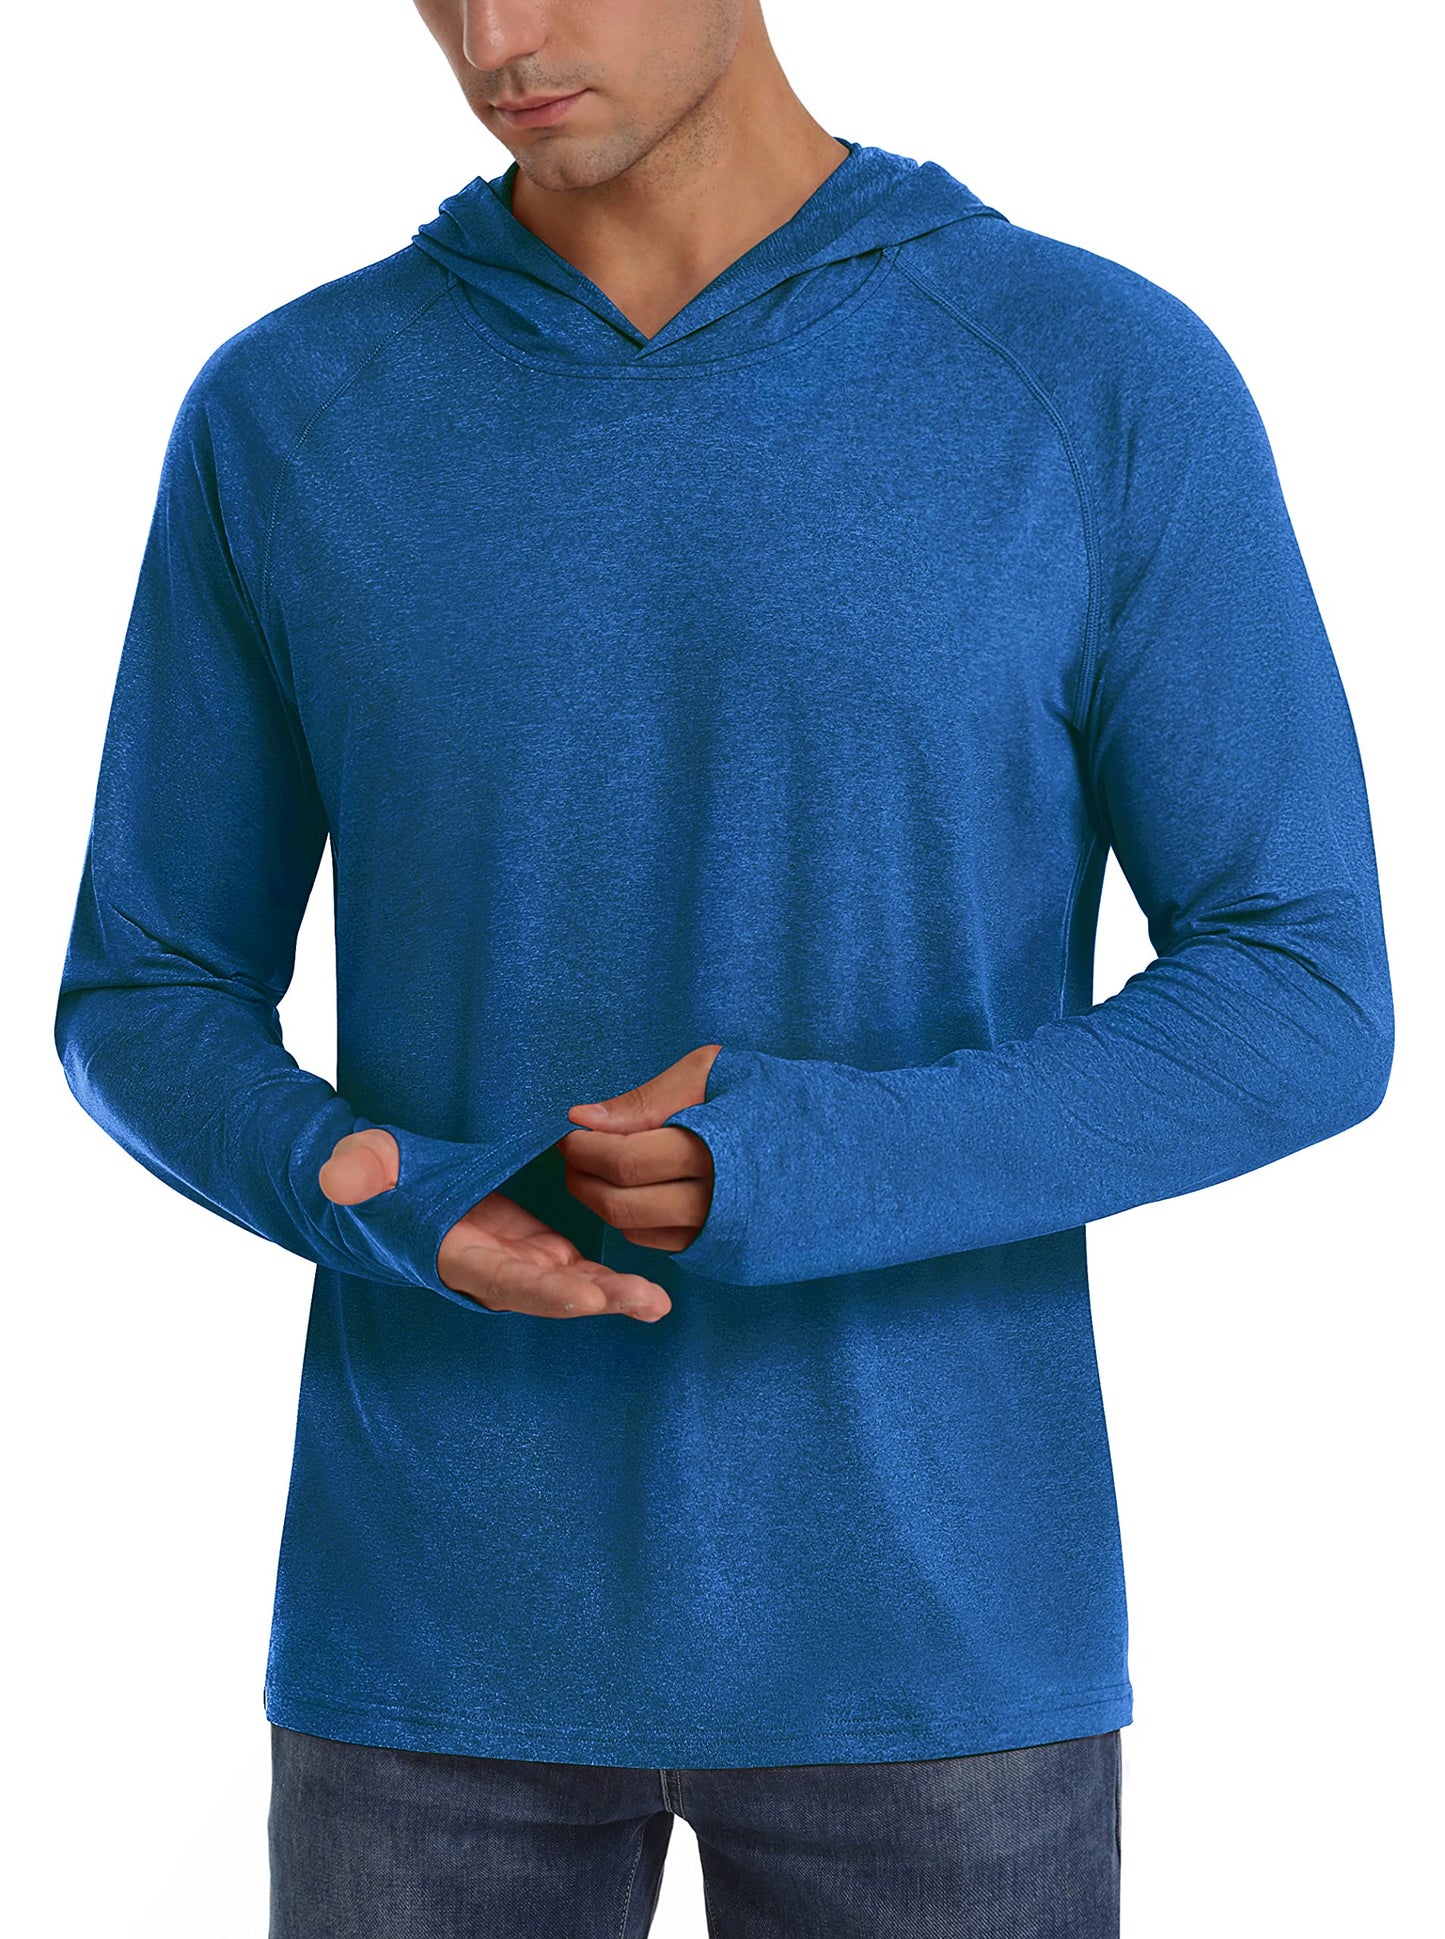 UPF 50+ Sun Protection Hoodie Shirts Men's Long Sleeve T-shirts Lightweight Quick Dry Pullovers Casual Fishing Tee Tops The Clothing Company Sydney